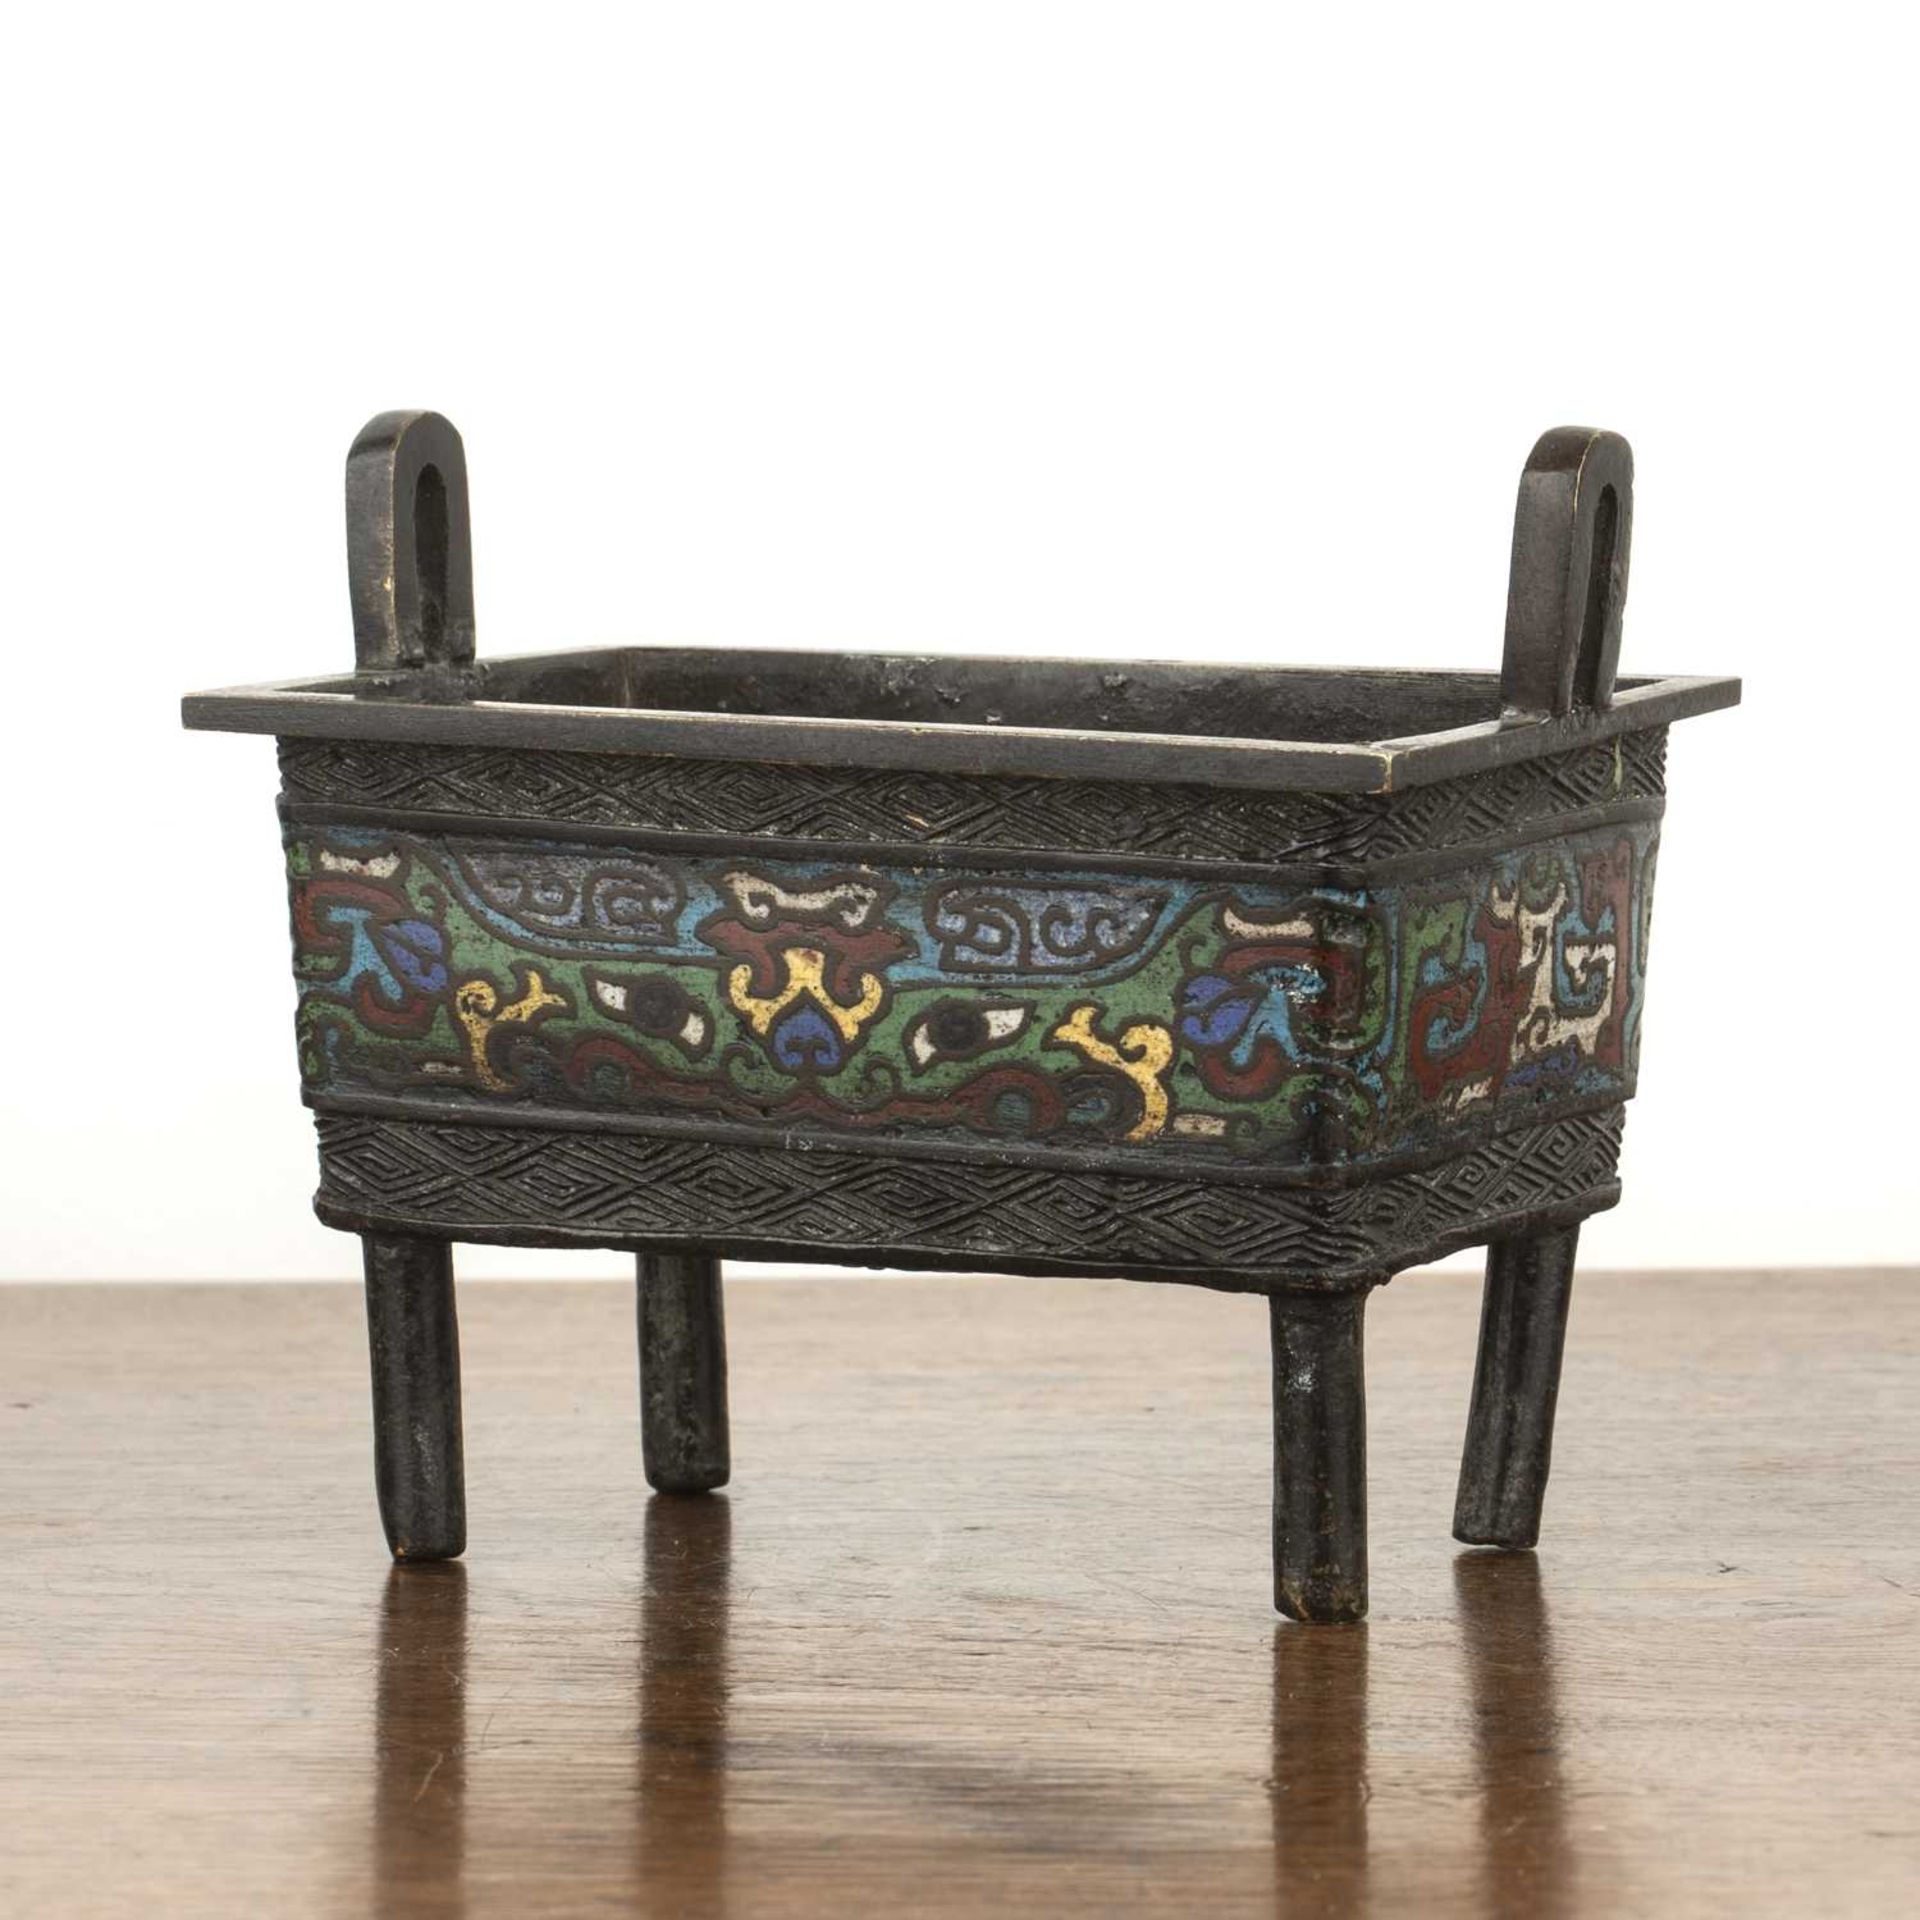 Small bronze censer Chinese of rectangular form with cloisonne panels, 13cm x 8.6cm x 11cm - Image 3 of 6